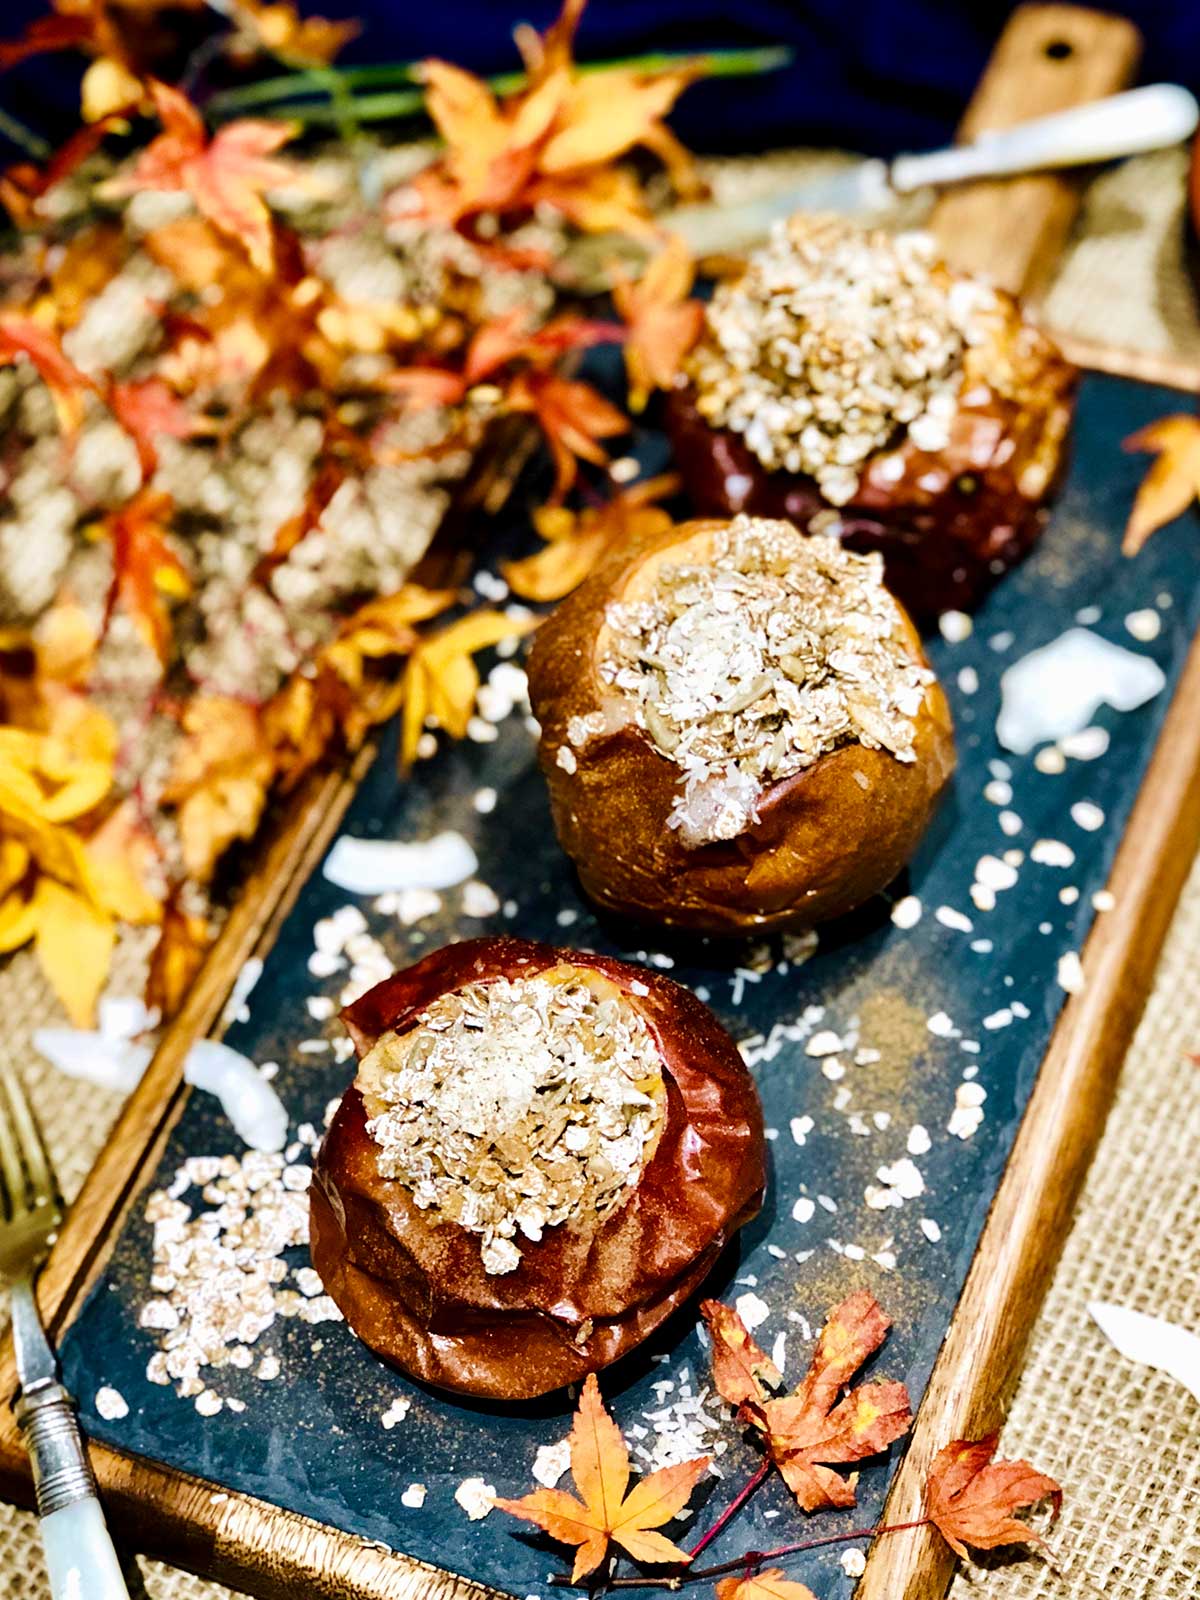 Close up or birdseye of three baked apples stuffed with oatmeal and coconut flakes sprinkled over on a black and wooden frame board.